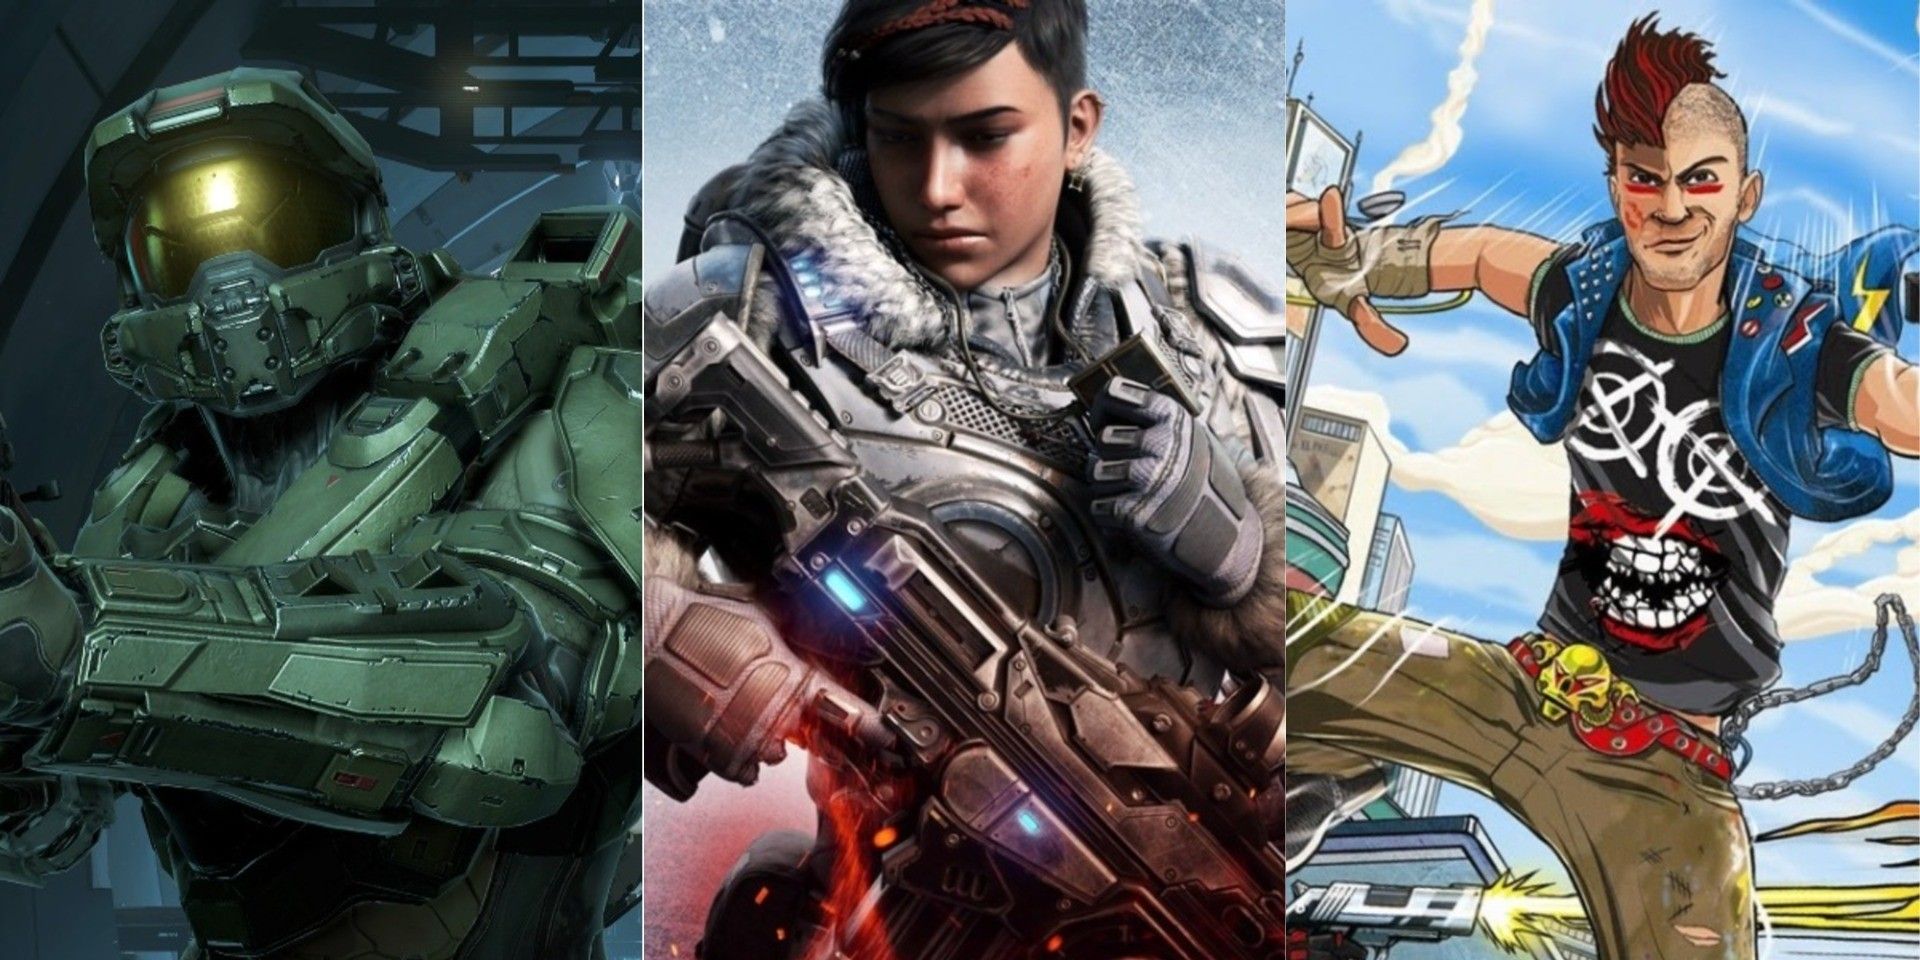 all games xbox one exclusives